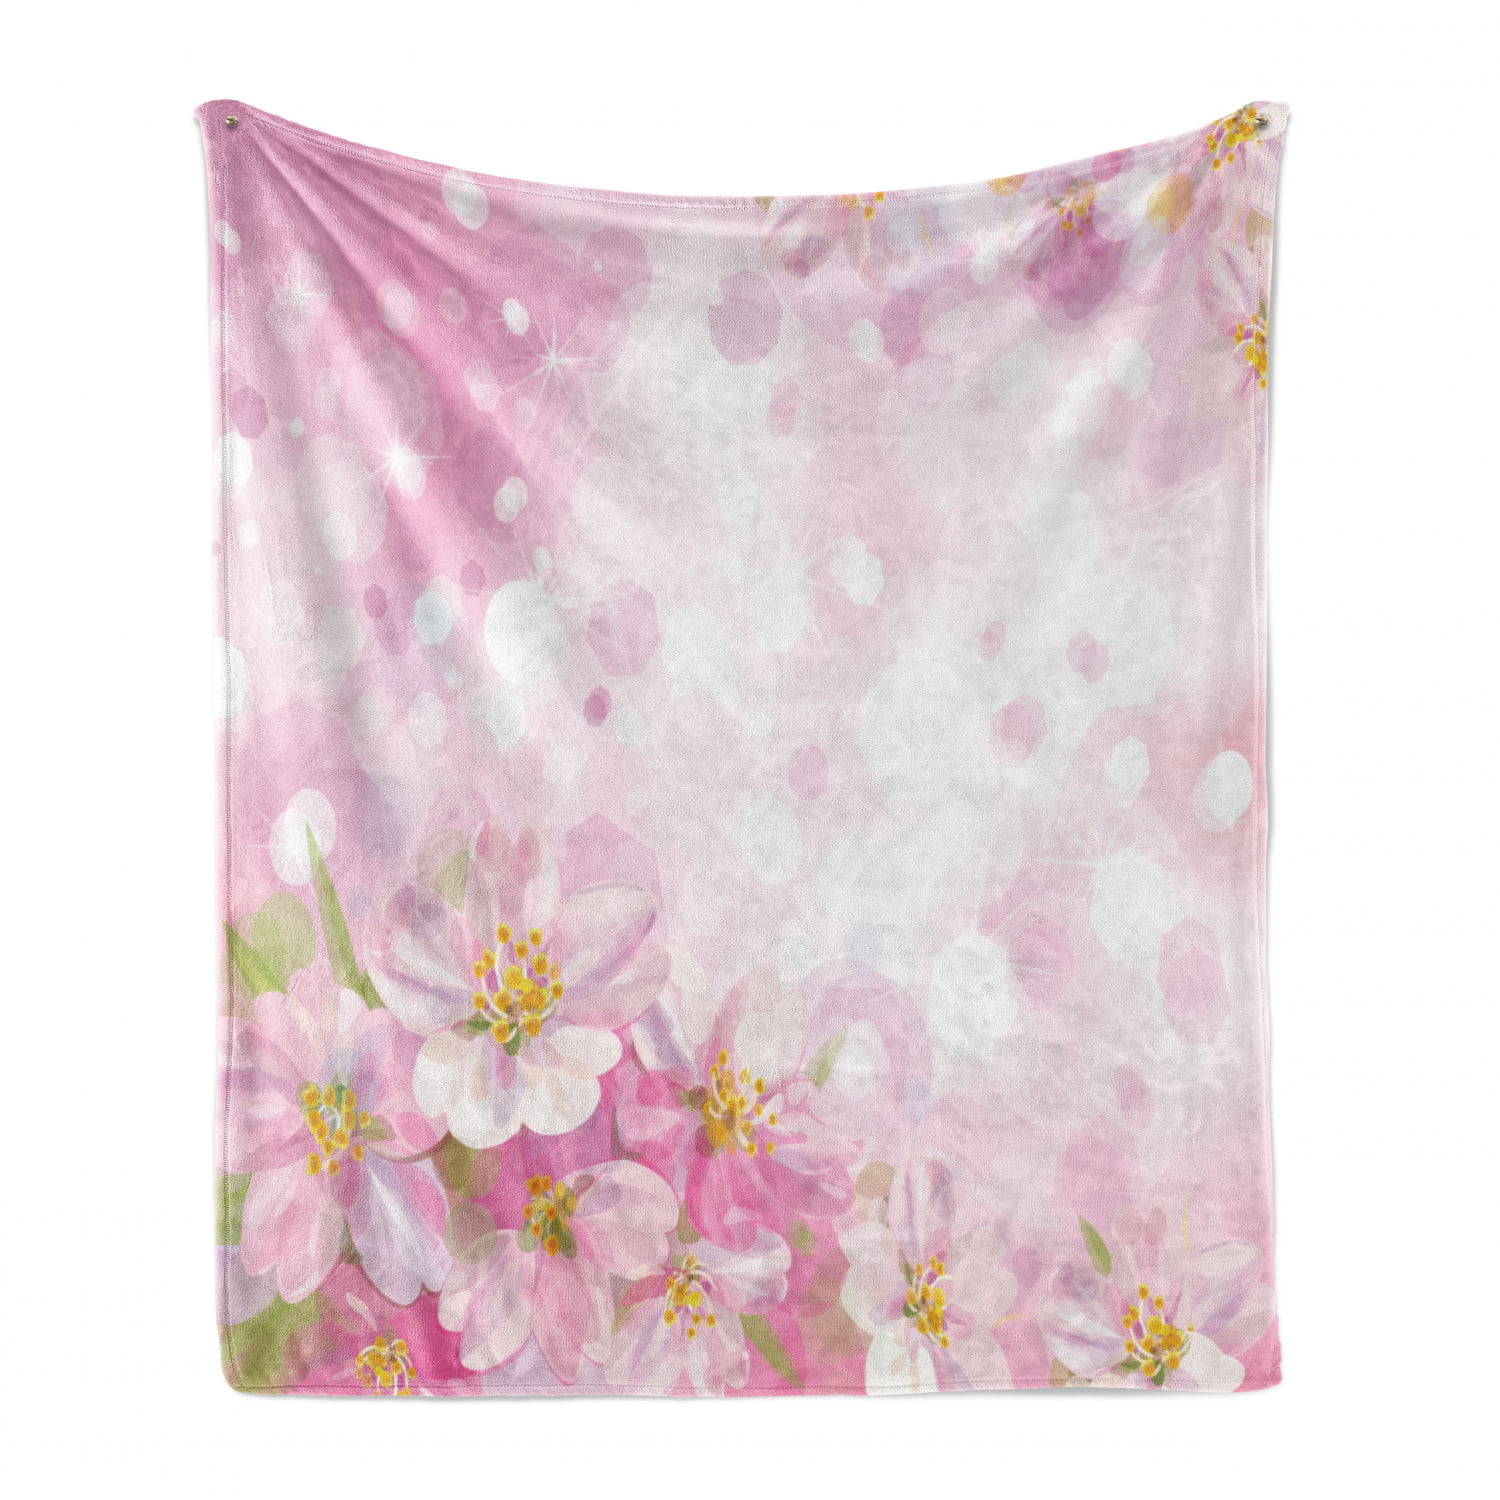 Cozy Plush for Indoor and Outdoor Use Pale Fuchsia Multicolor Ambesonne Floral Soft Flannel Fleece Throw Blanket 70 x 90 Watercolor Style Painting Illustration of a Magnolia Flower on a Branch